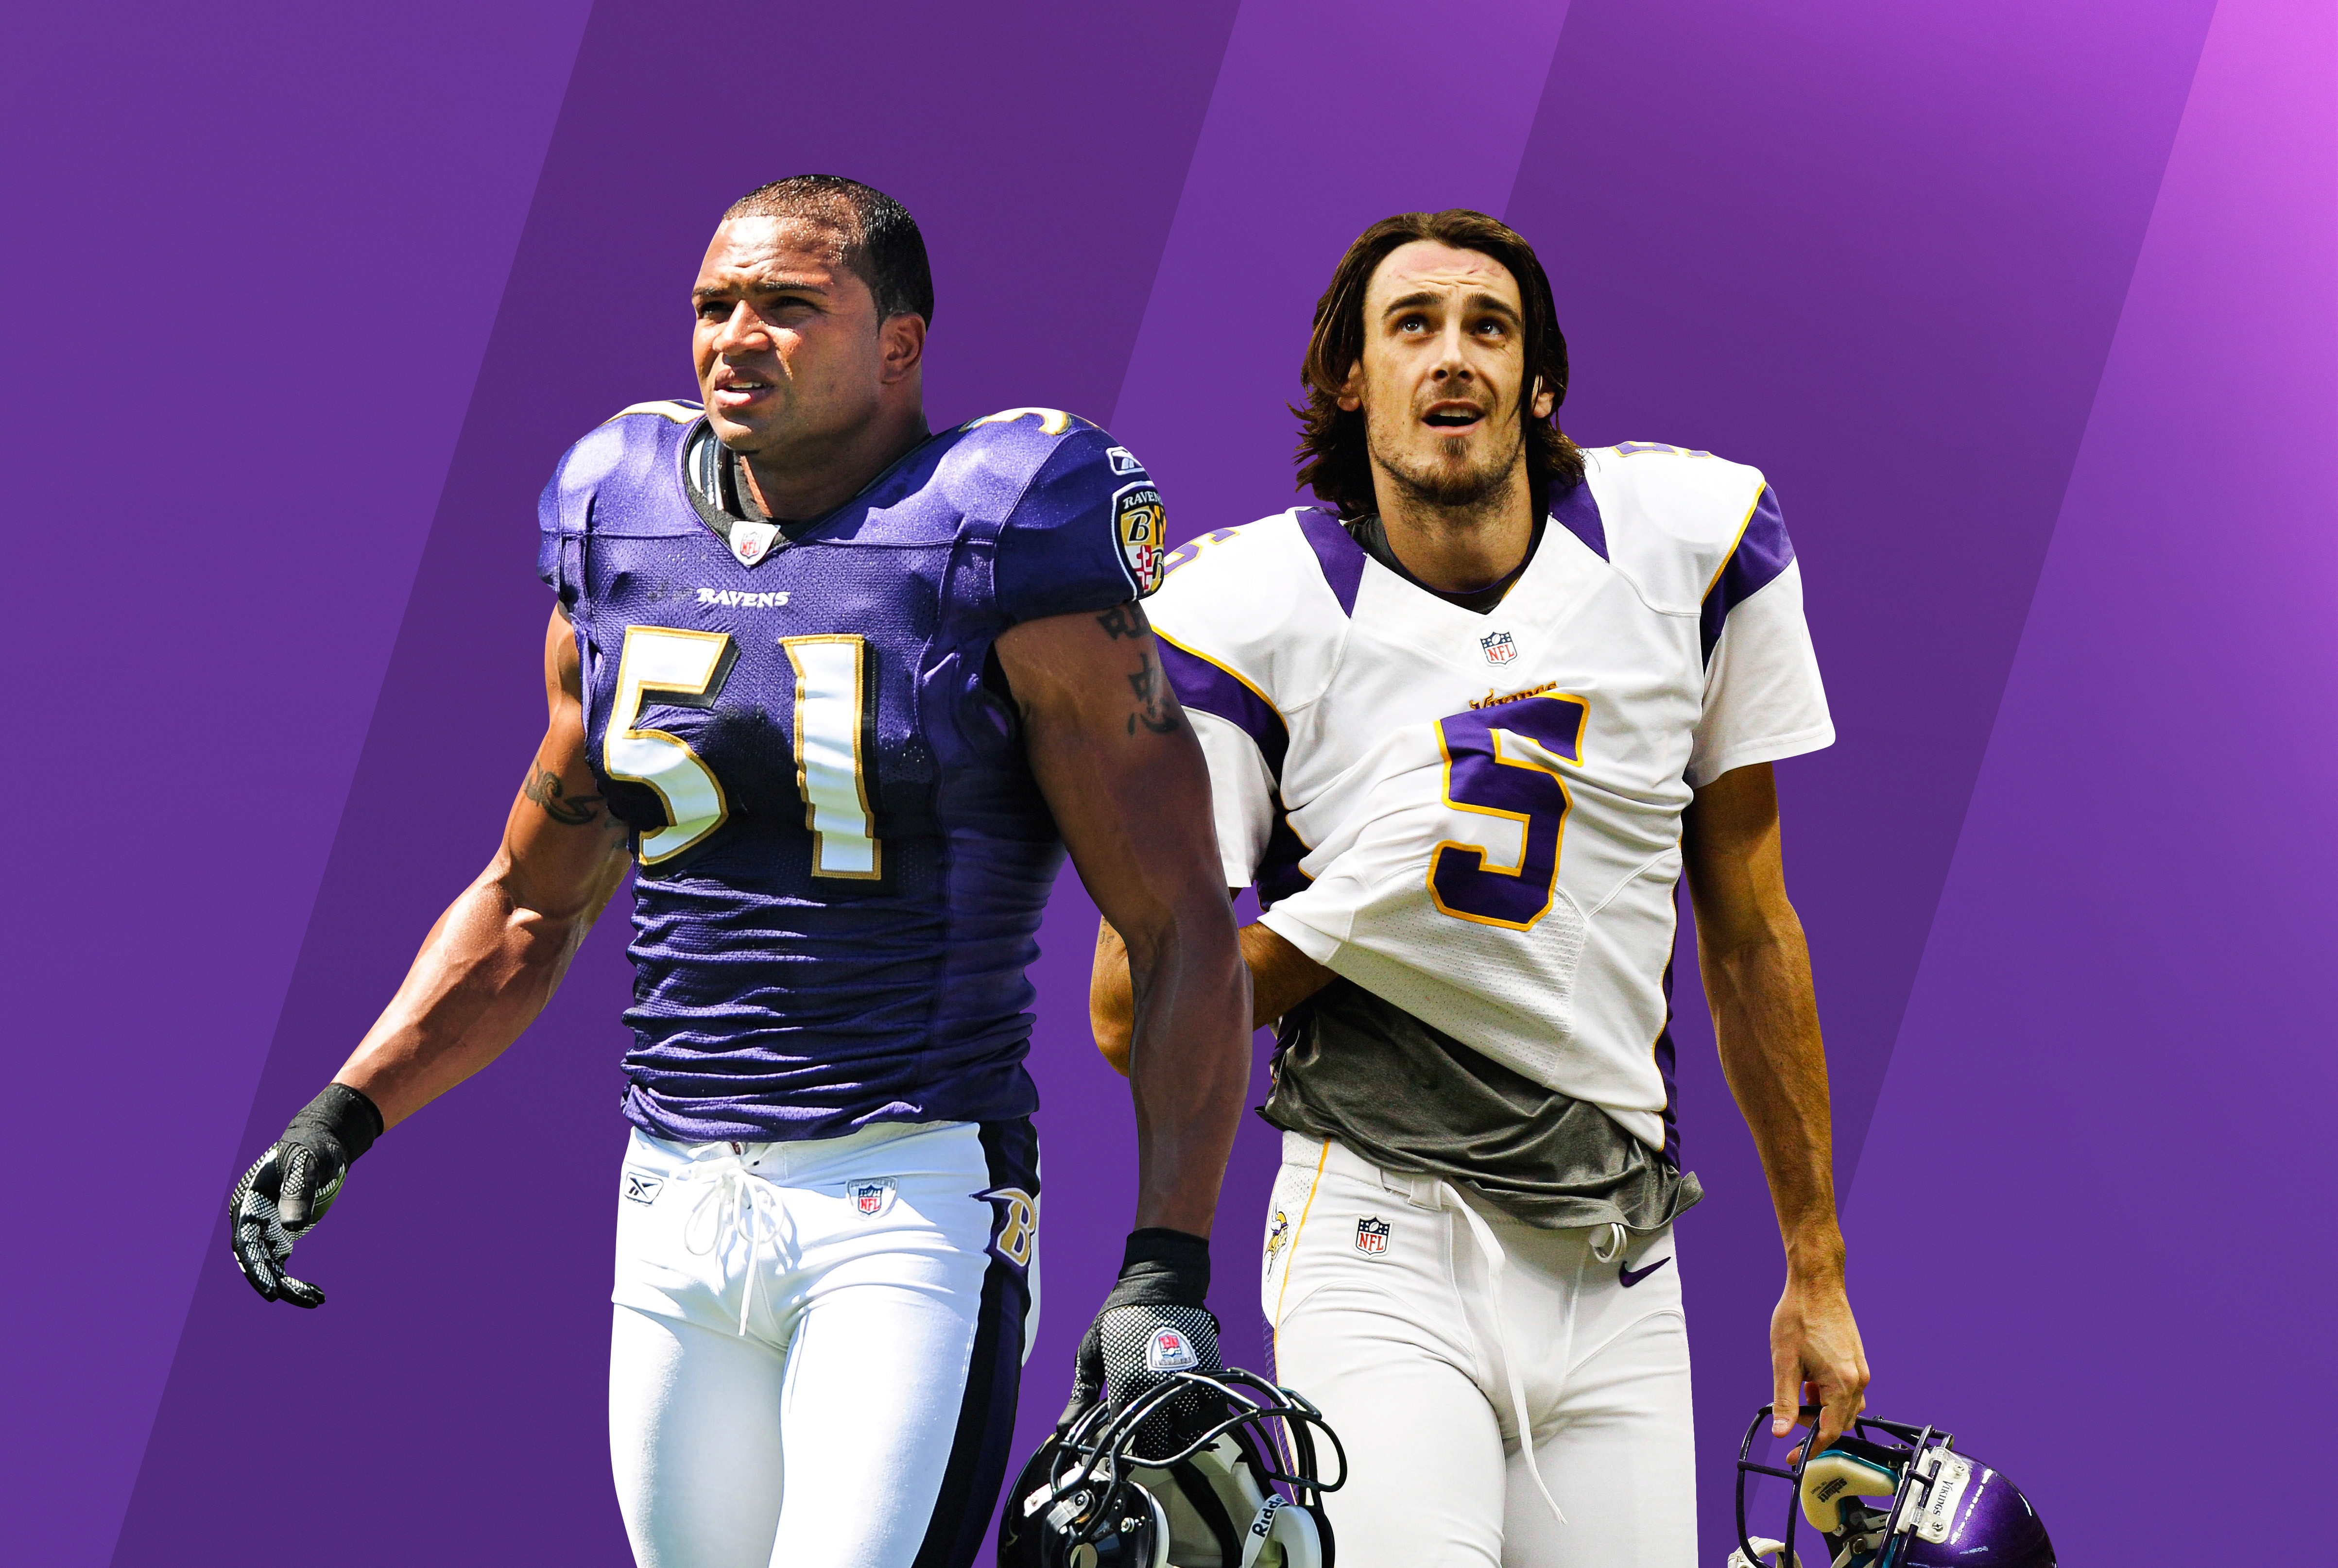 Ex-NFLers Brendon Ayanbadejo & Chris Kluwe: Champions of Equality for the LGBTQ+ Community